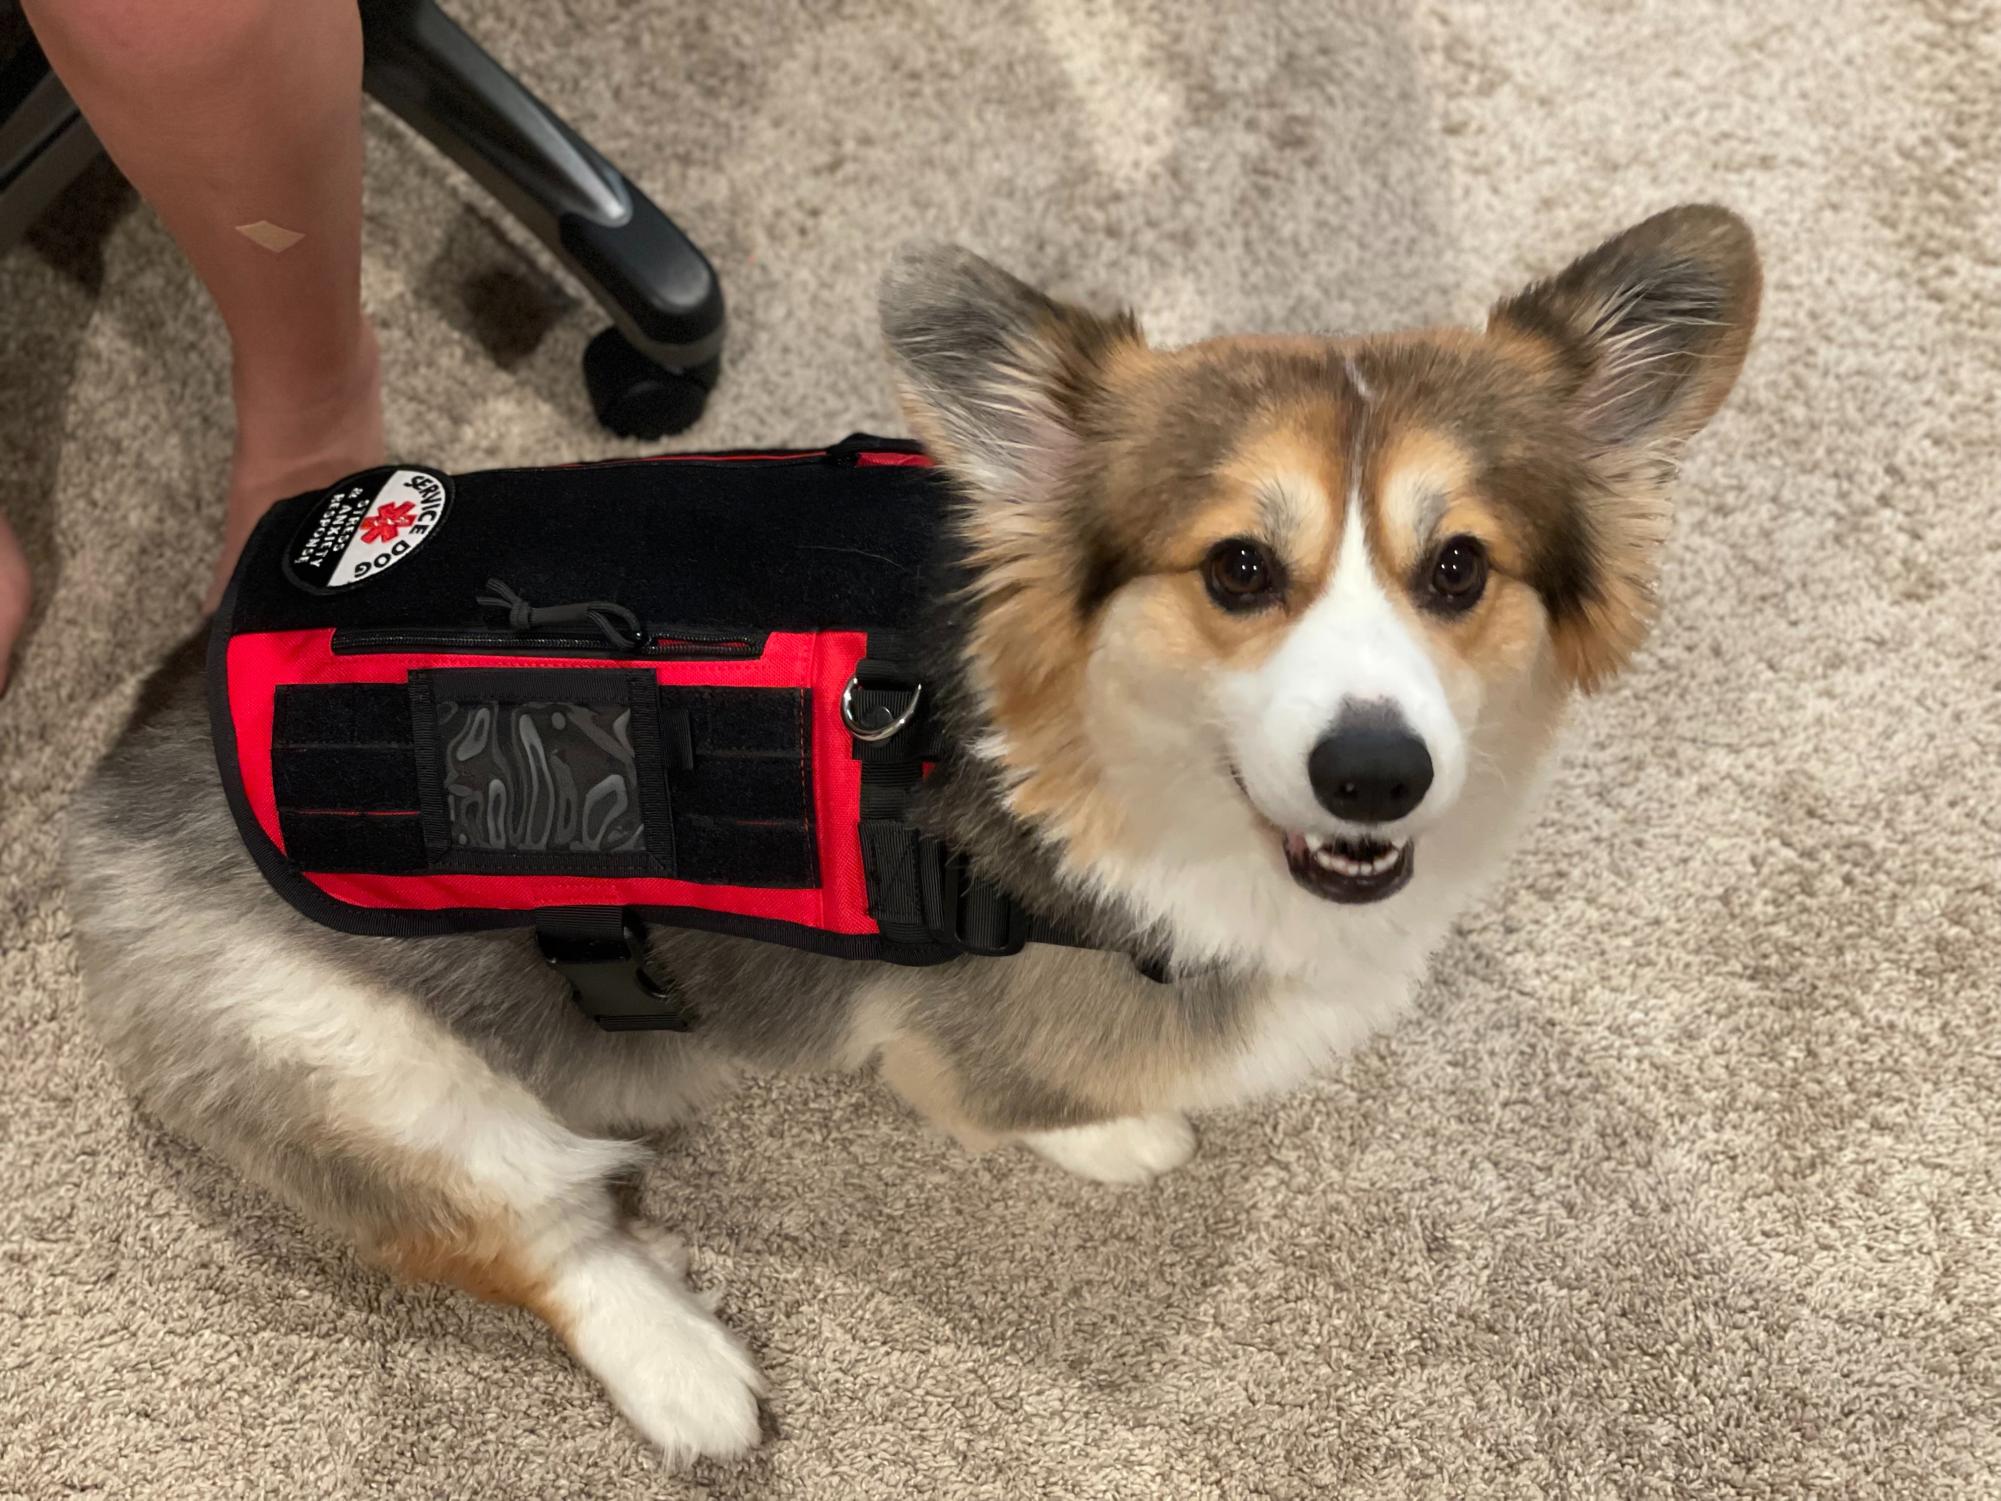 Corgi Gidget sits beside culinary teacher Ashley Kurth. Kurth adopted Gidget, who is trained in pressure therapy and touch alert, in 2019.